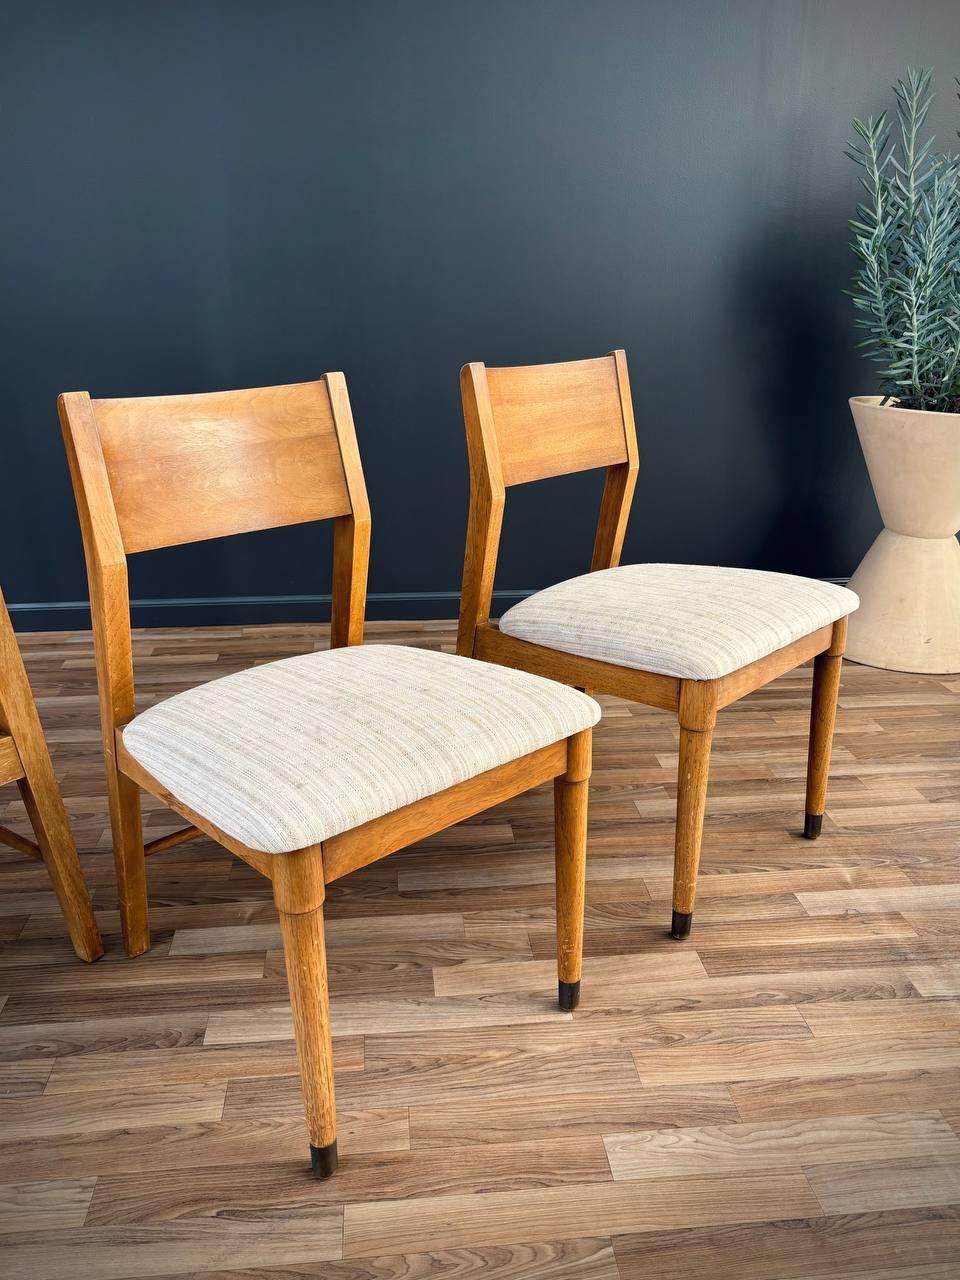 Set of 6 Mid-Century Modern Oak Dining Chairs by Drexel In Good Condition For Sale In Los Angeles, CA